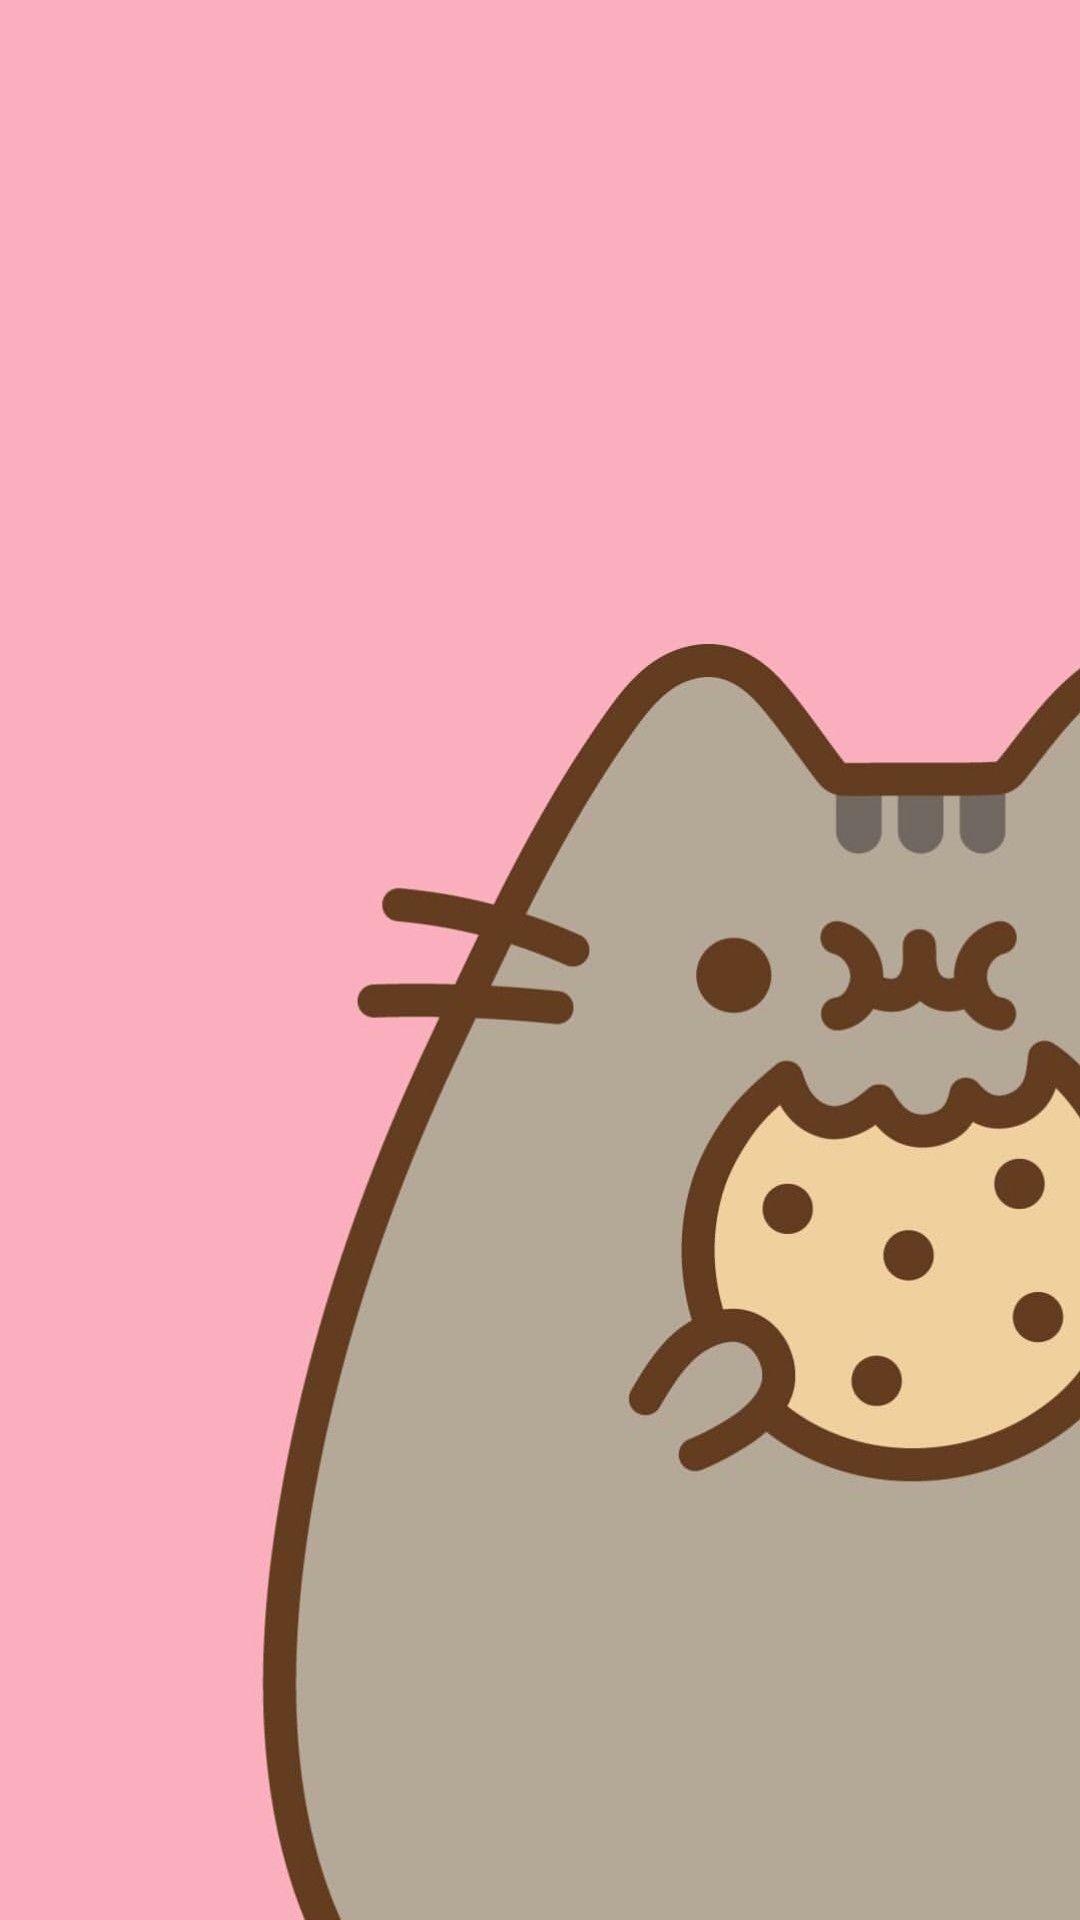 A cat is eating cookies on pink background - Pusheen